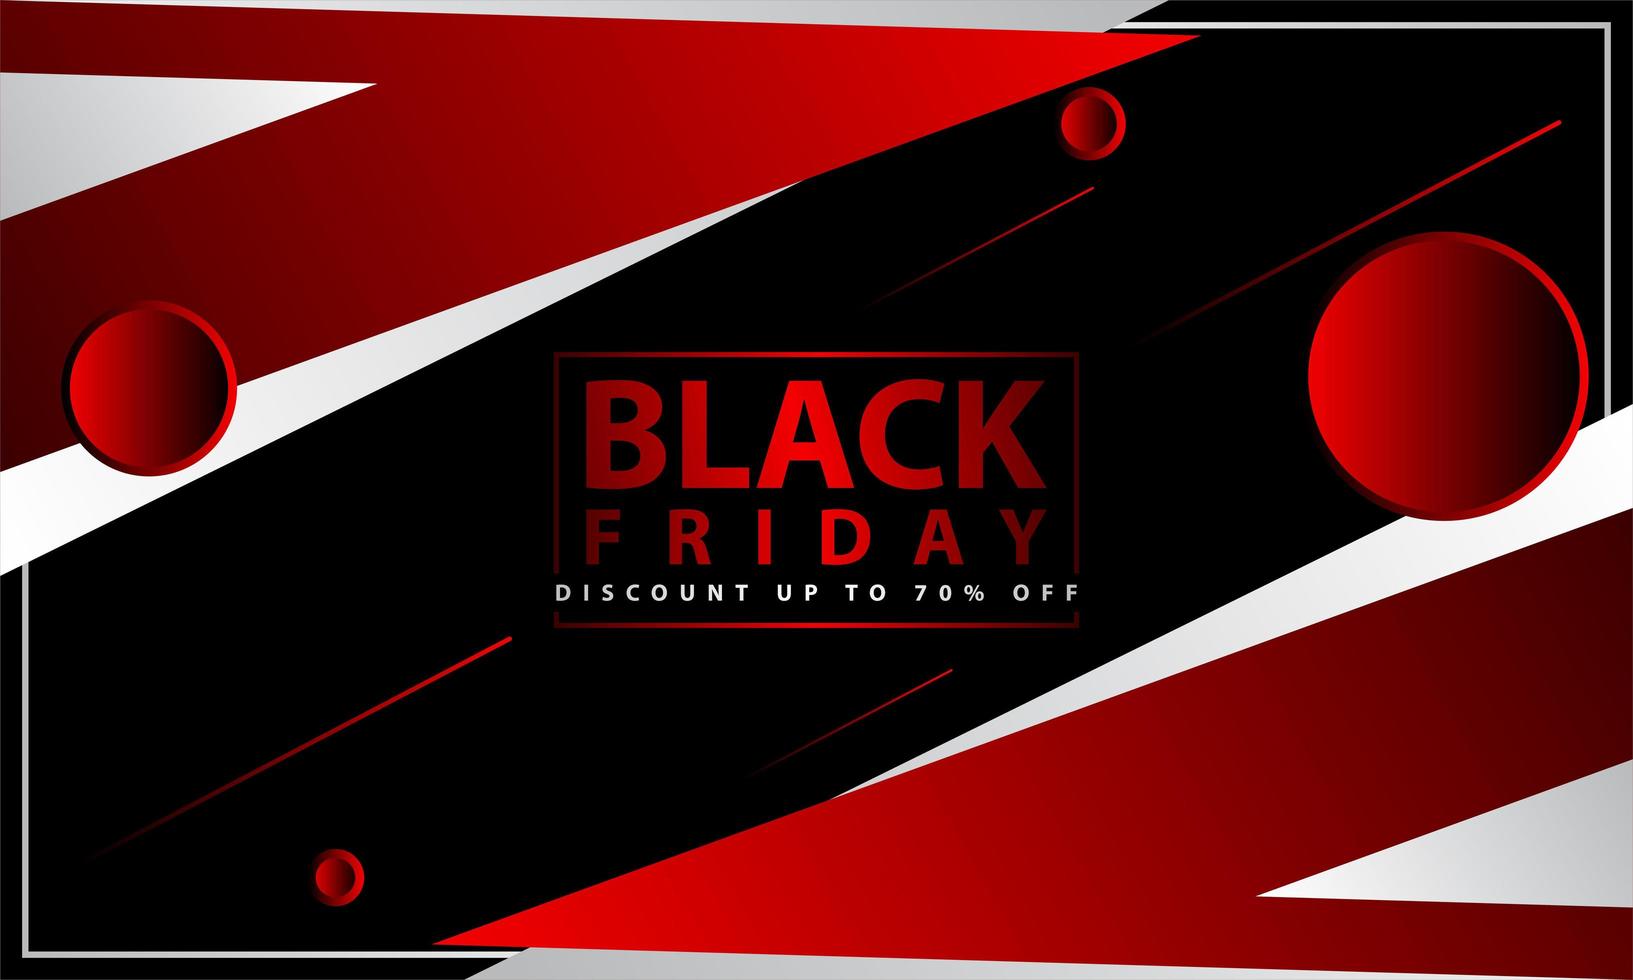 Black Friday Red, White and Black Geometric Design vector